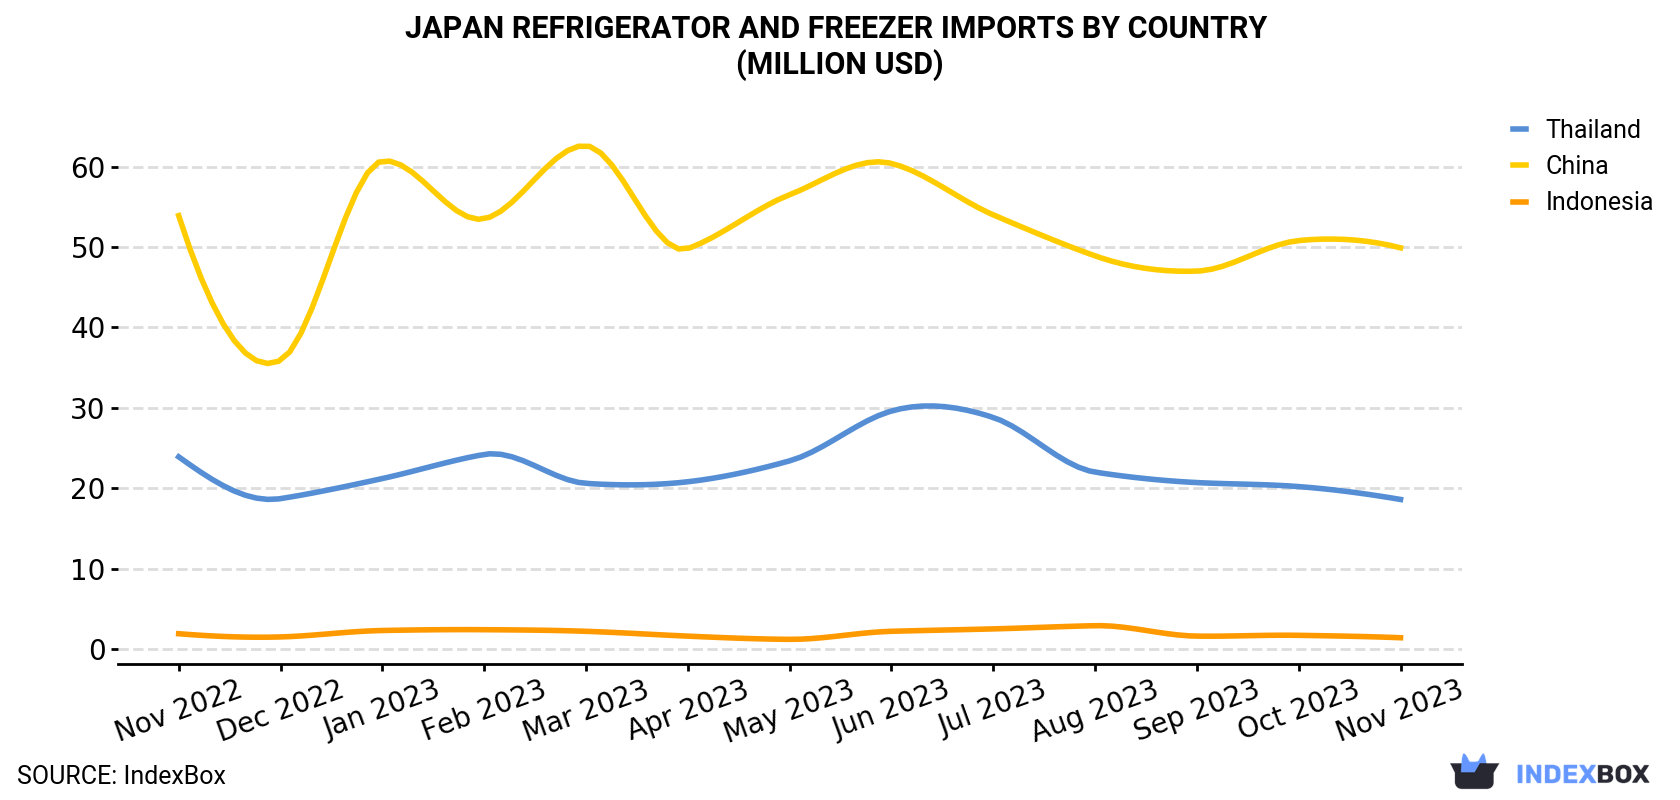 Japan Refrigerator and Freezer Imports By Country (Million USD)